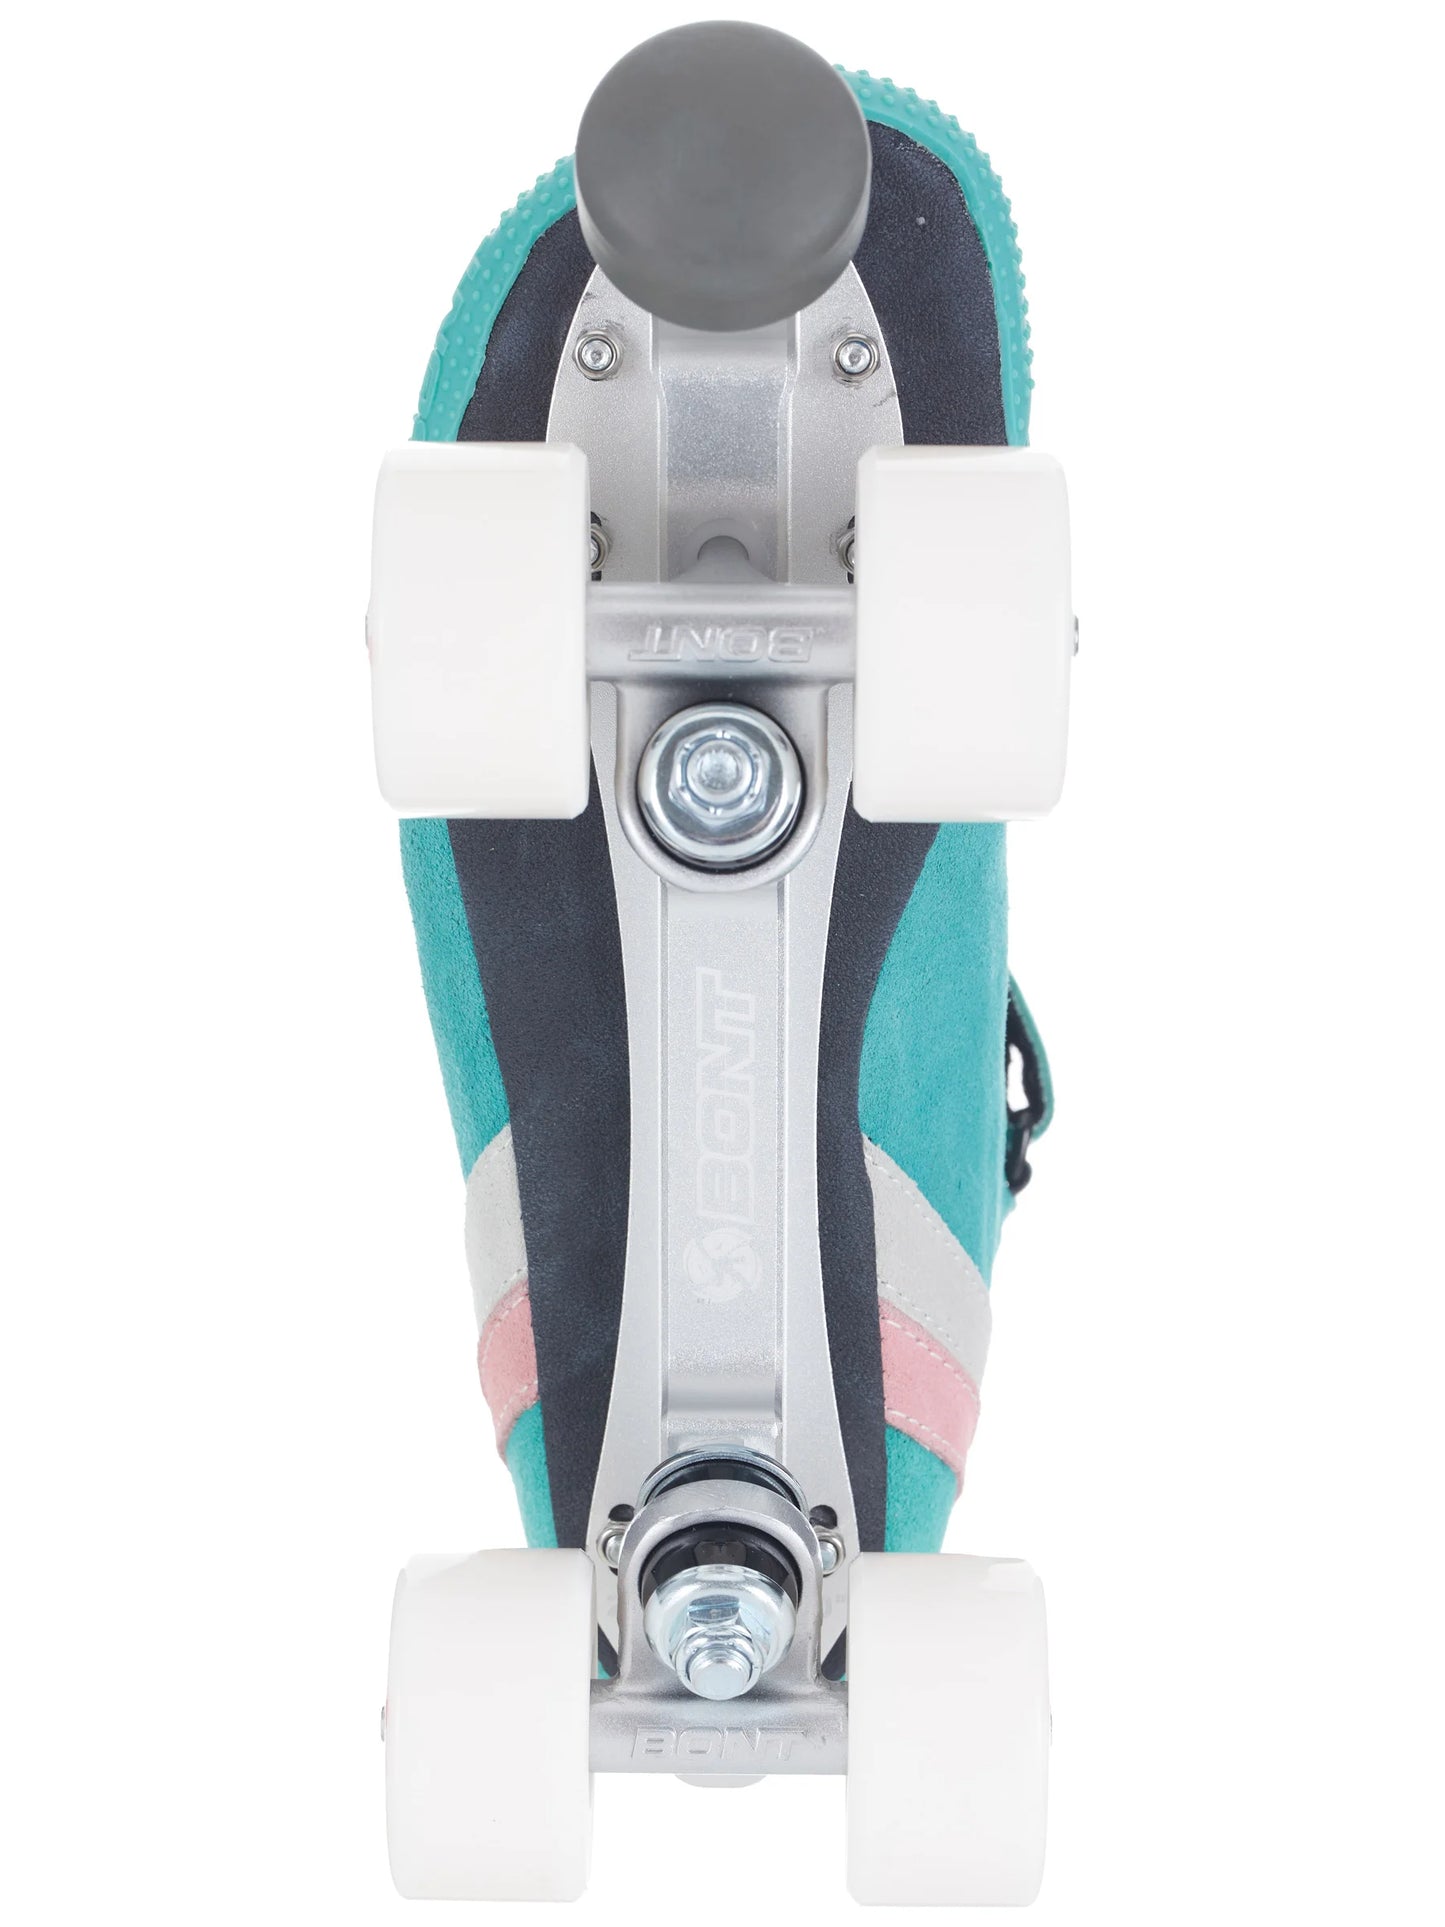 Bont parkstar roller skates are in Las Vegas. Stop by Fresas Skate Shop and try these skates on. You will fall in love with this Teal with a hint of Pink color skates. Let's Roll around Downtown Las Vegas.